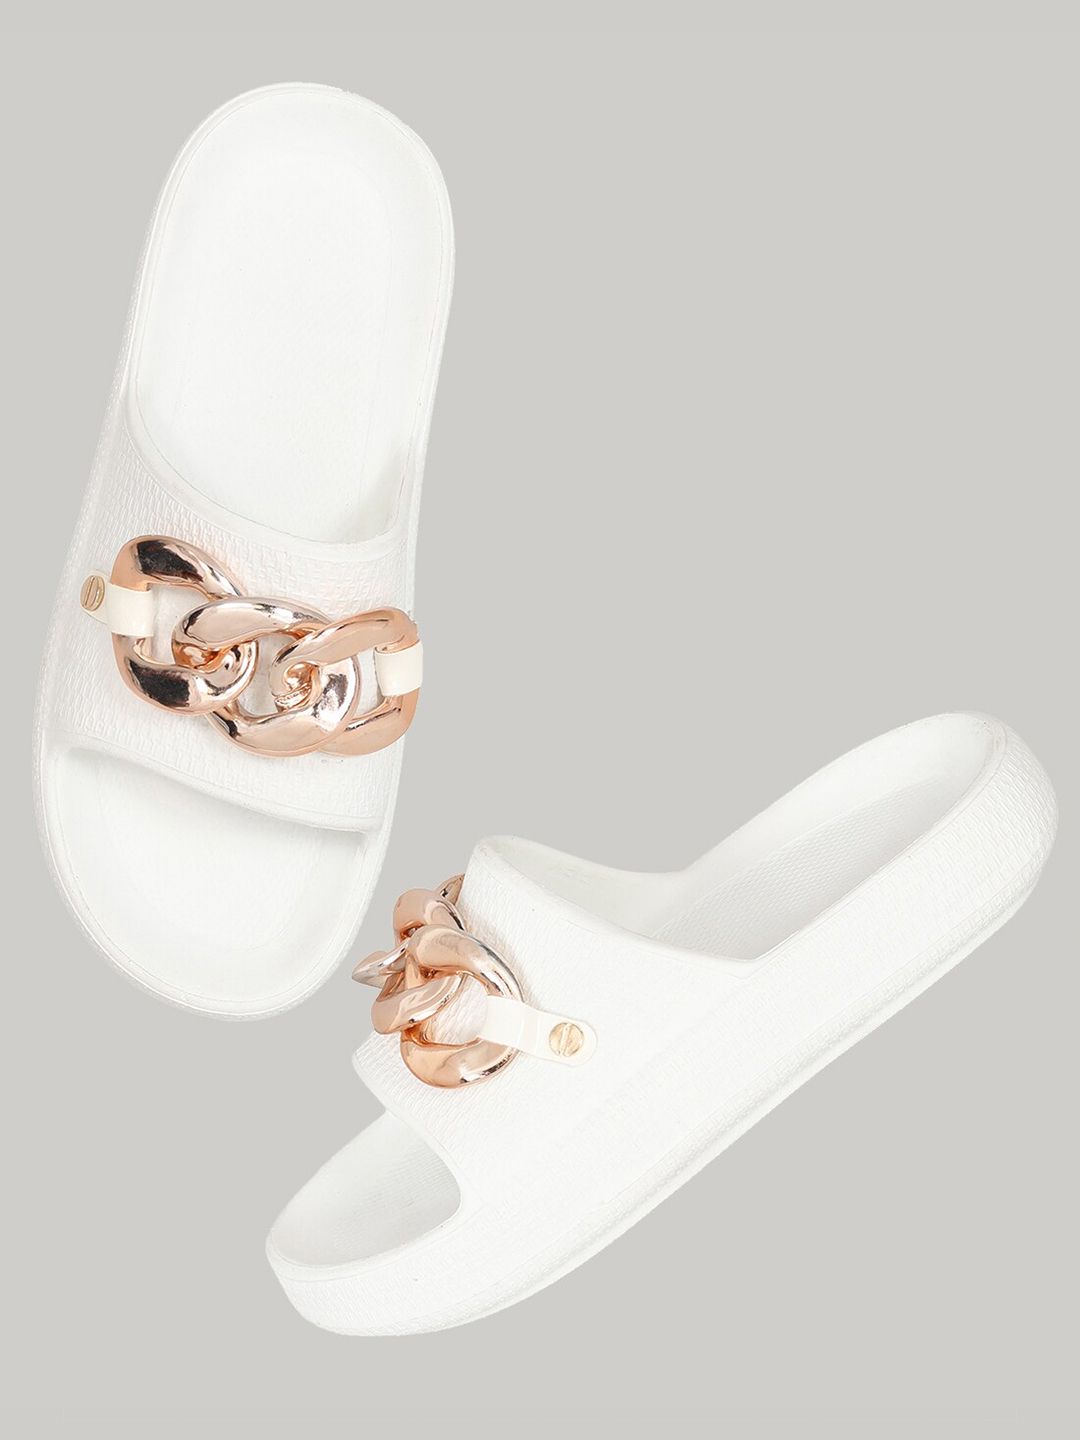 Zyla Women White & Copper-Toned Embellished Rubber Sliders Price in India